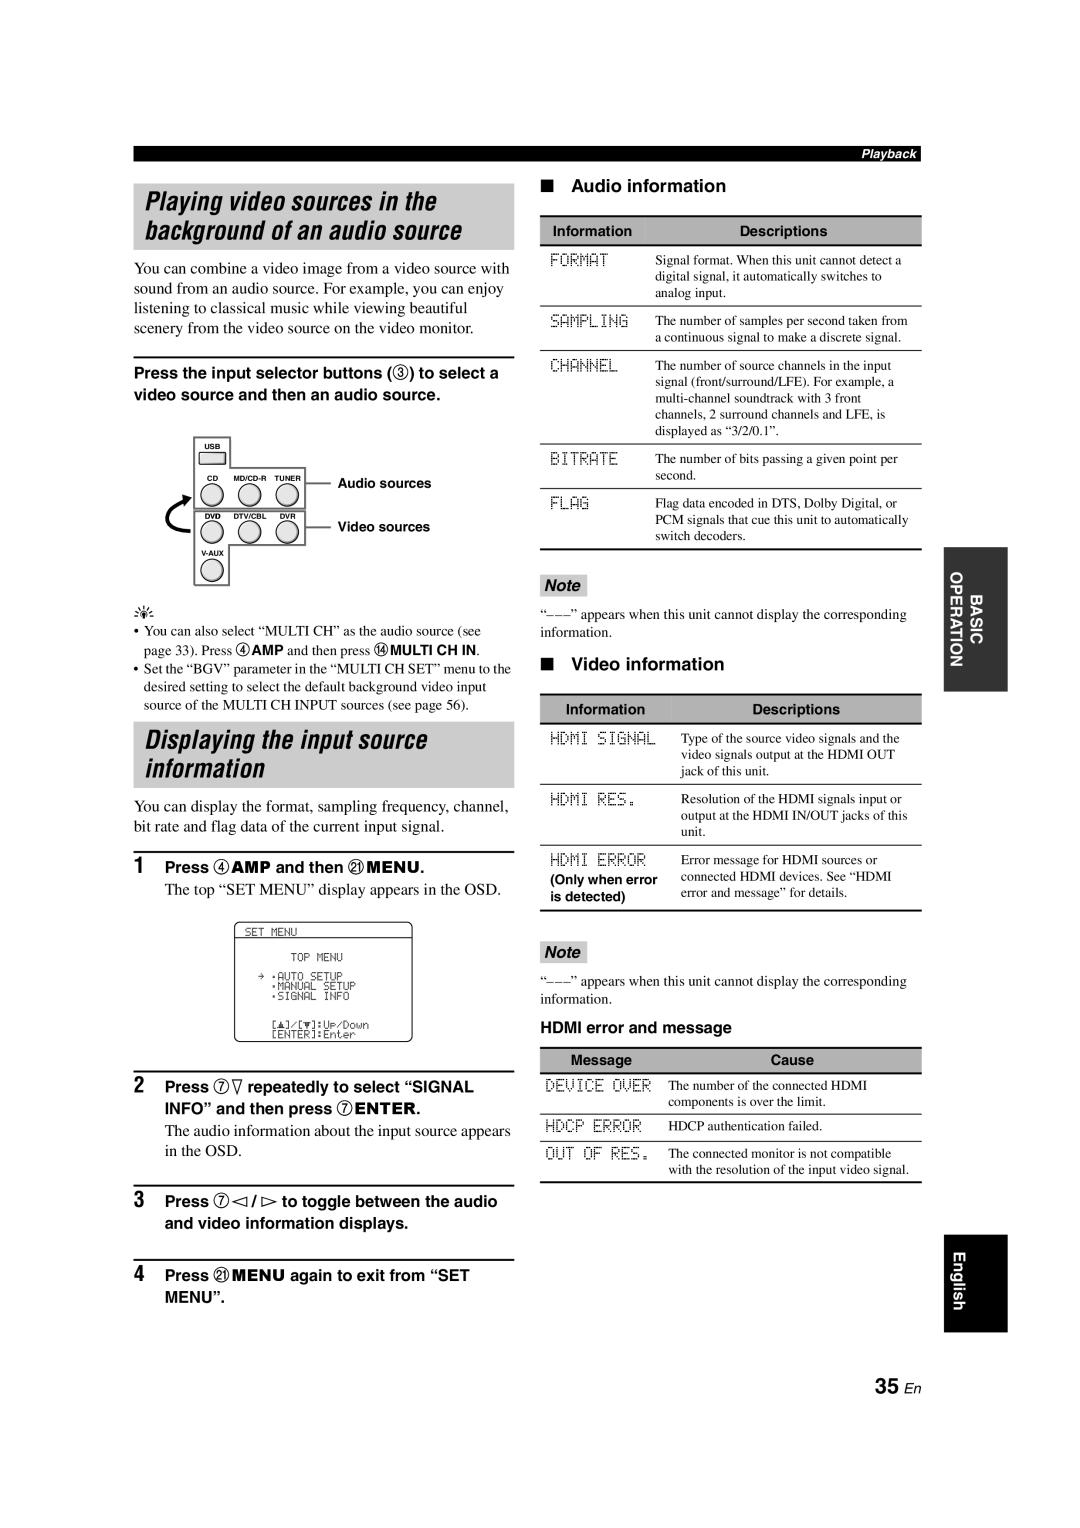 Yamaha DSP-AX463 owner manual Displaying the input source information, 35 En, Audio information, Video information 